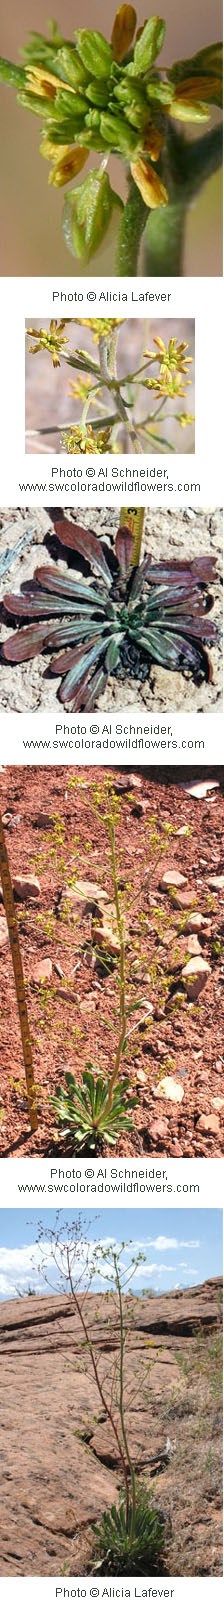 Several photos of small yellow flowers on a green stem. Background is orange colored soil and rock.